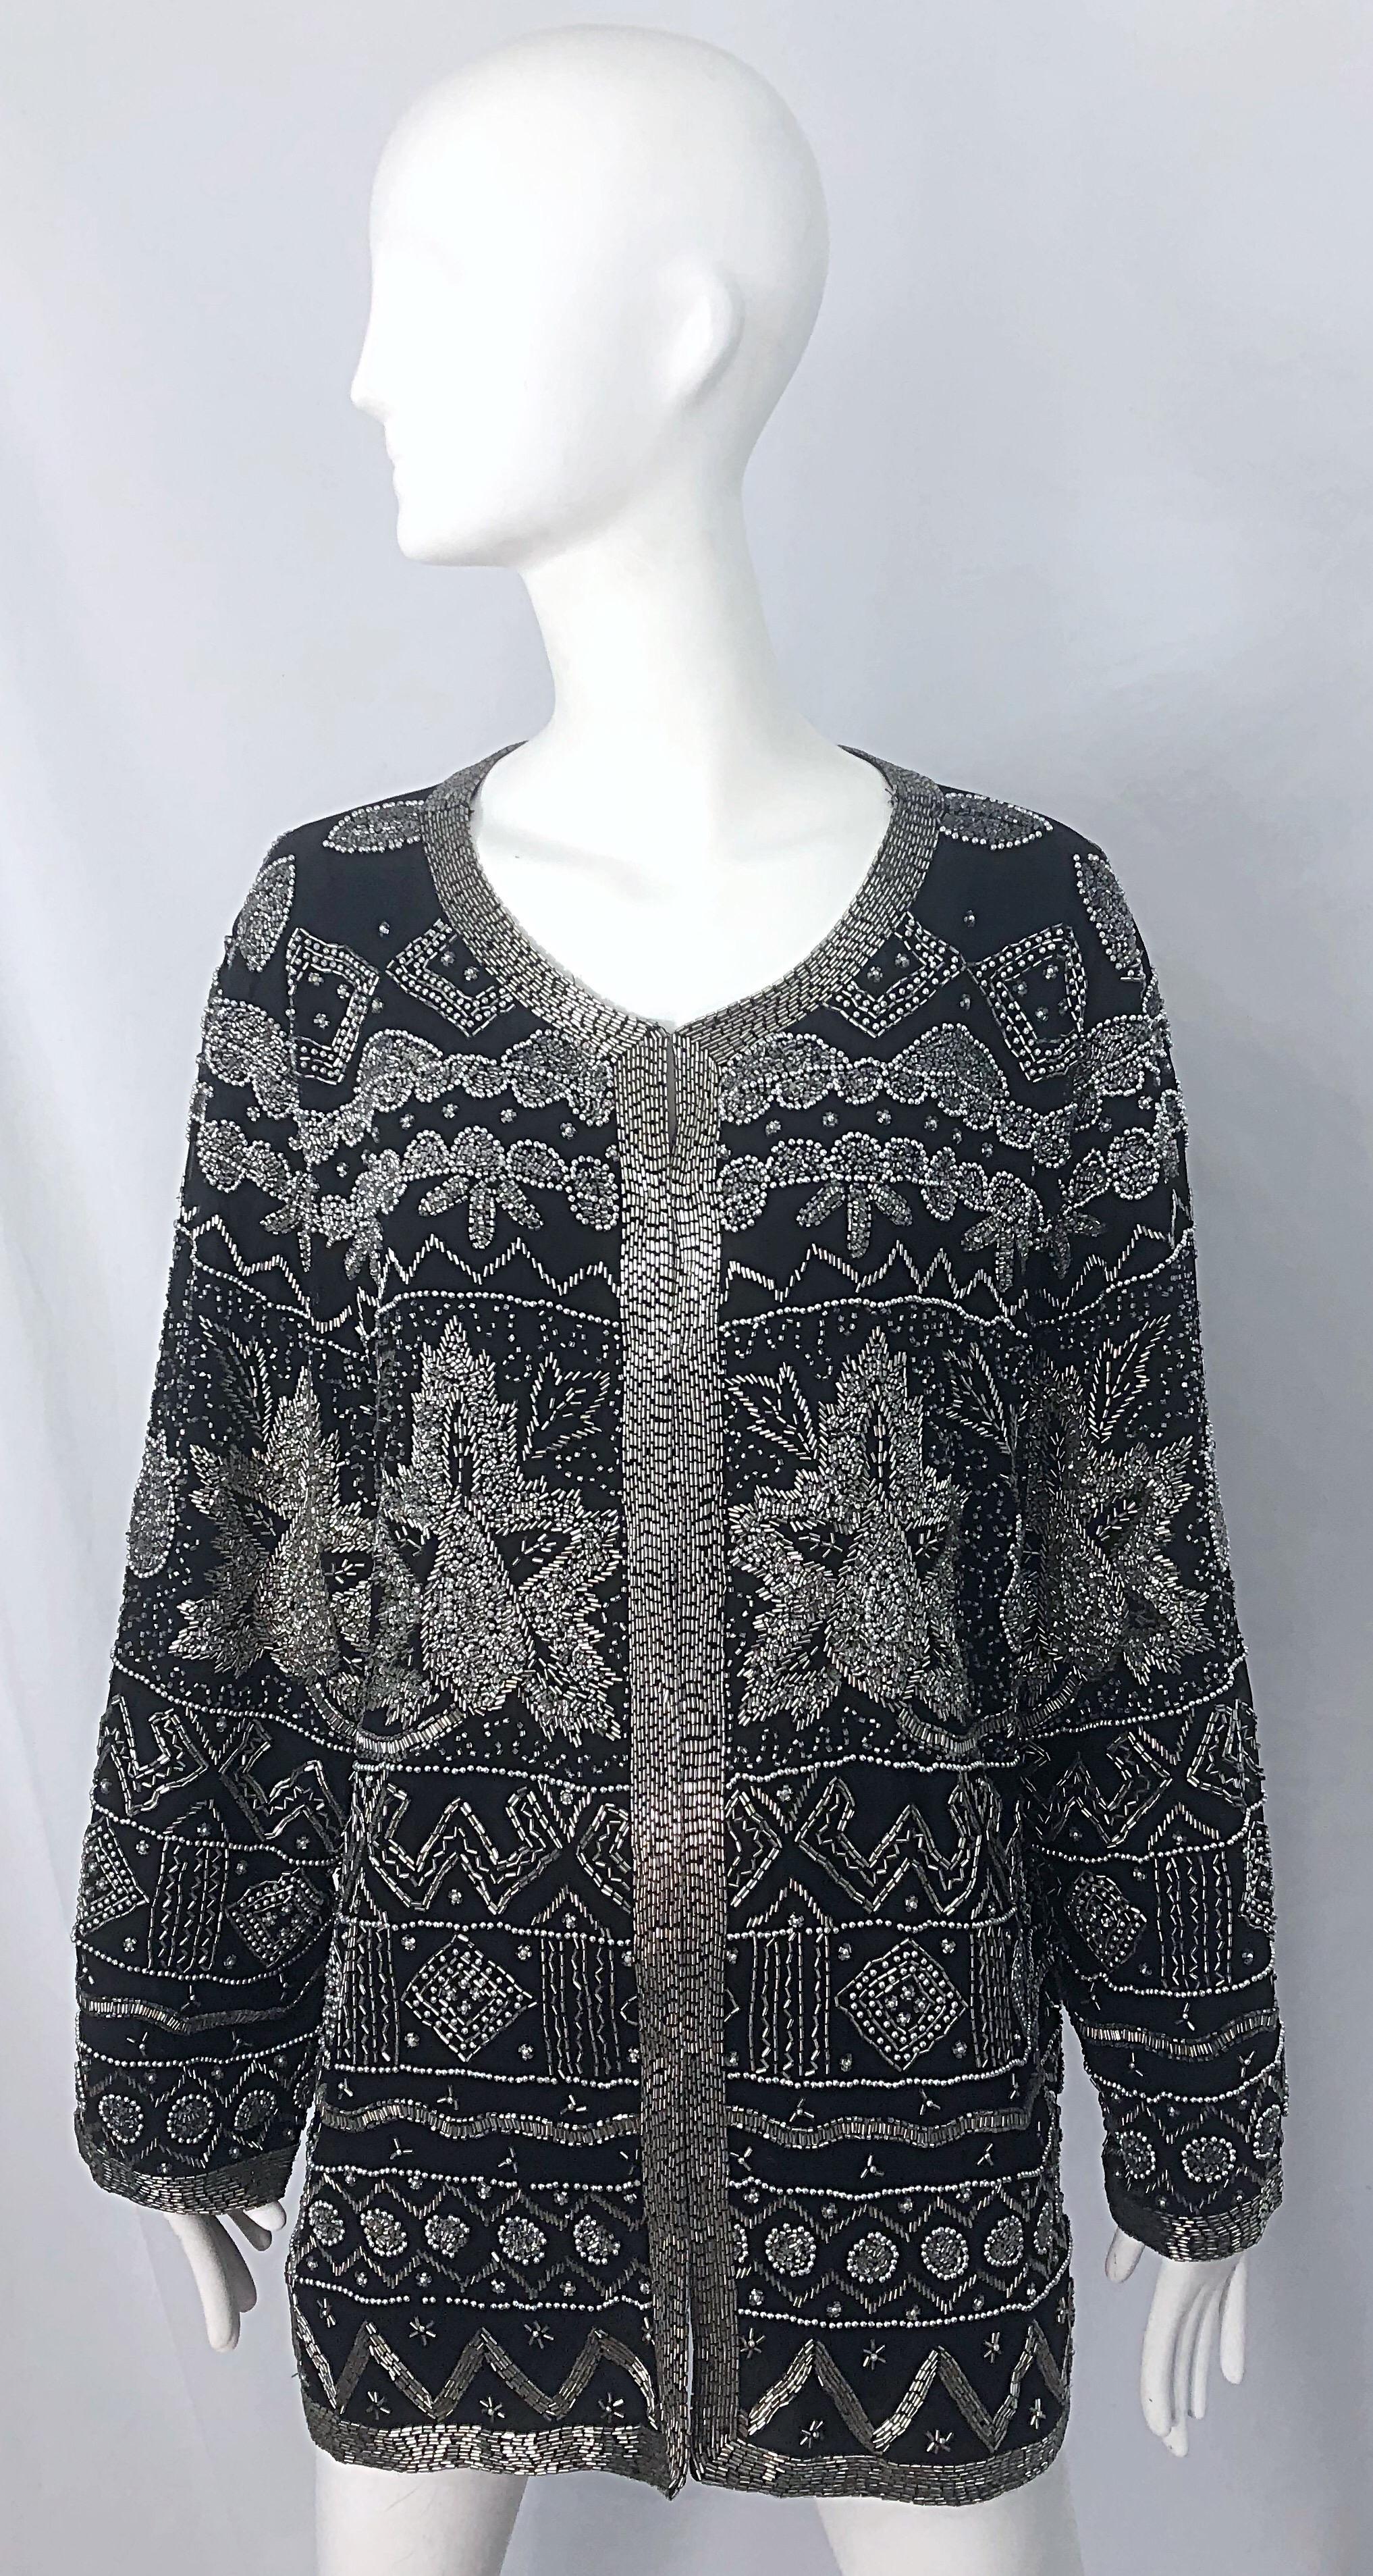 Amazing early 1990s 3XL plus size heavily beaded black and silver silk chiffon jacket / cardigan top ! Features multiple layered black silk chiffon with thousands of hand-sewn silver beads and sequins. Hidden hook-and-eye closures up the front. Can